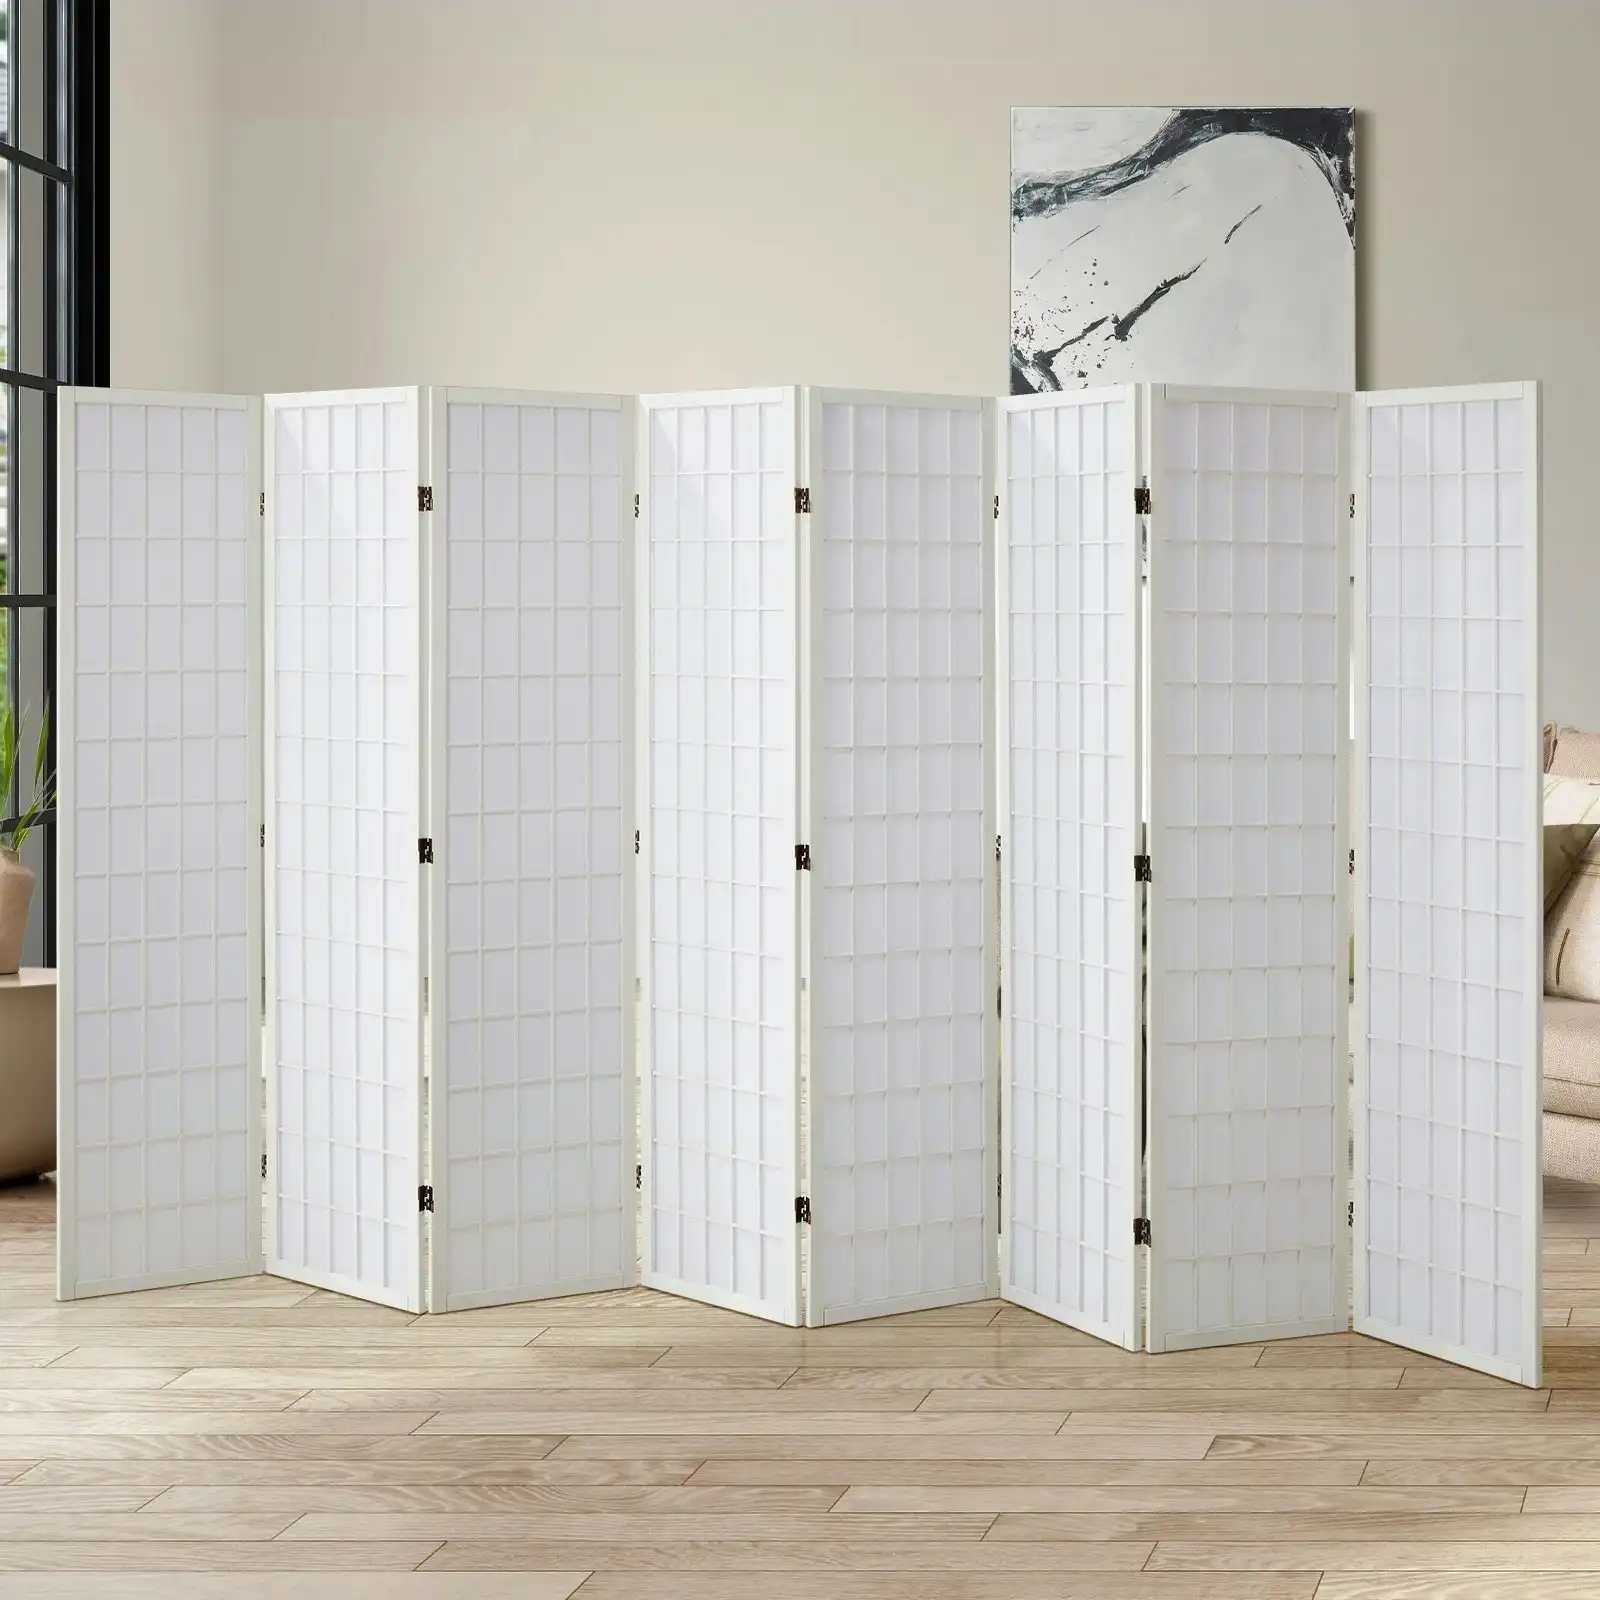 Oikiture 8 Panel Room Divider Privacy Screen Partition Timber Farbic White